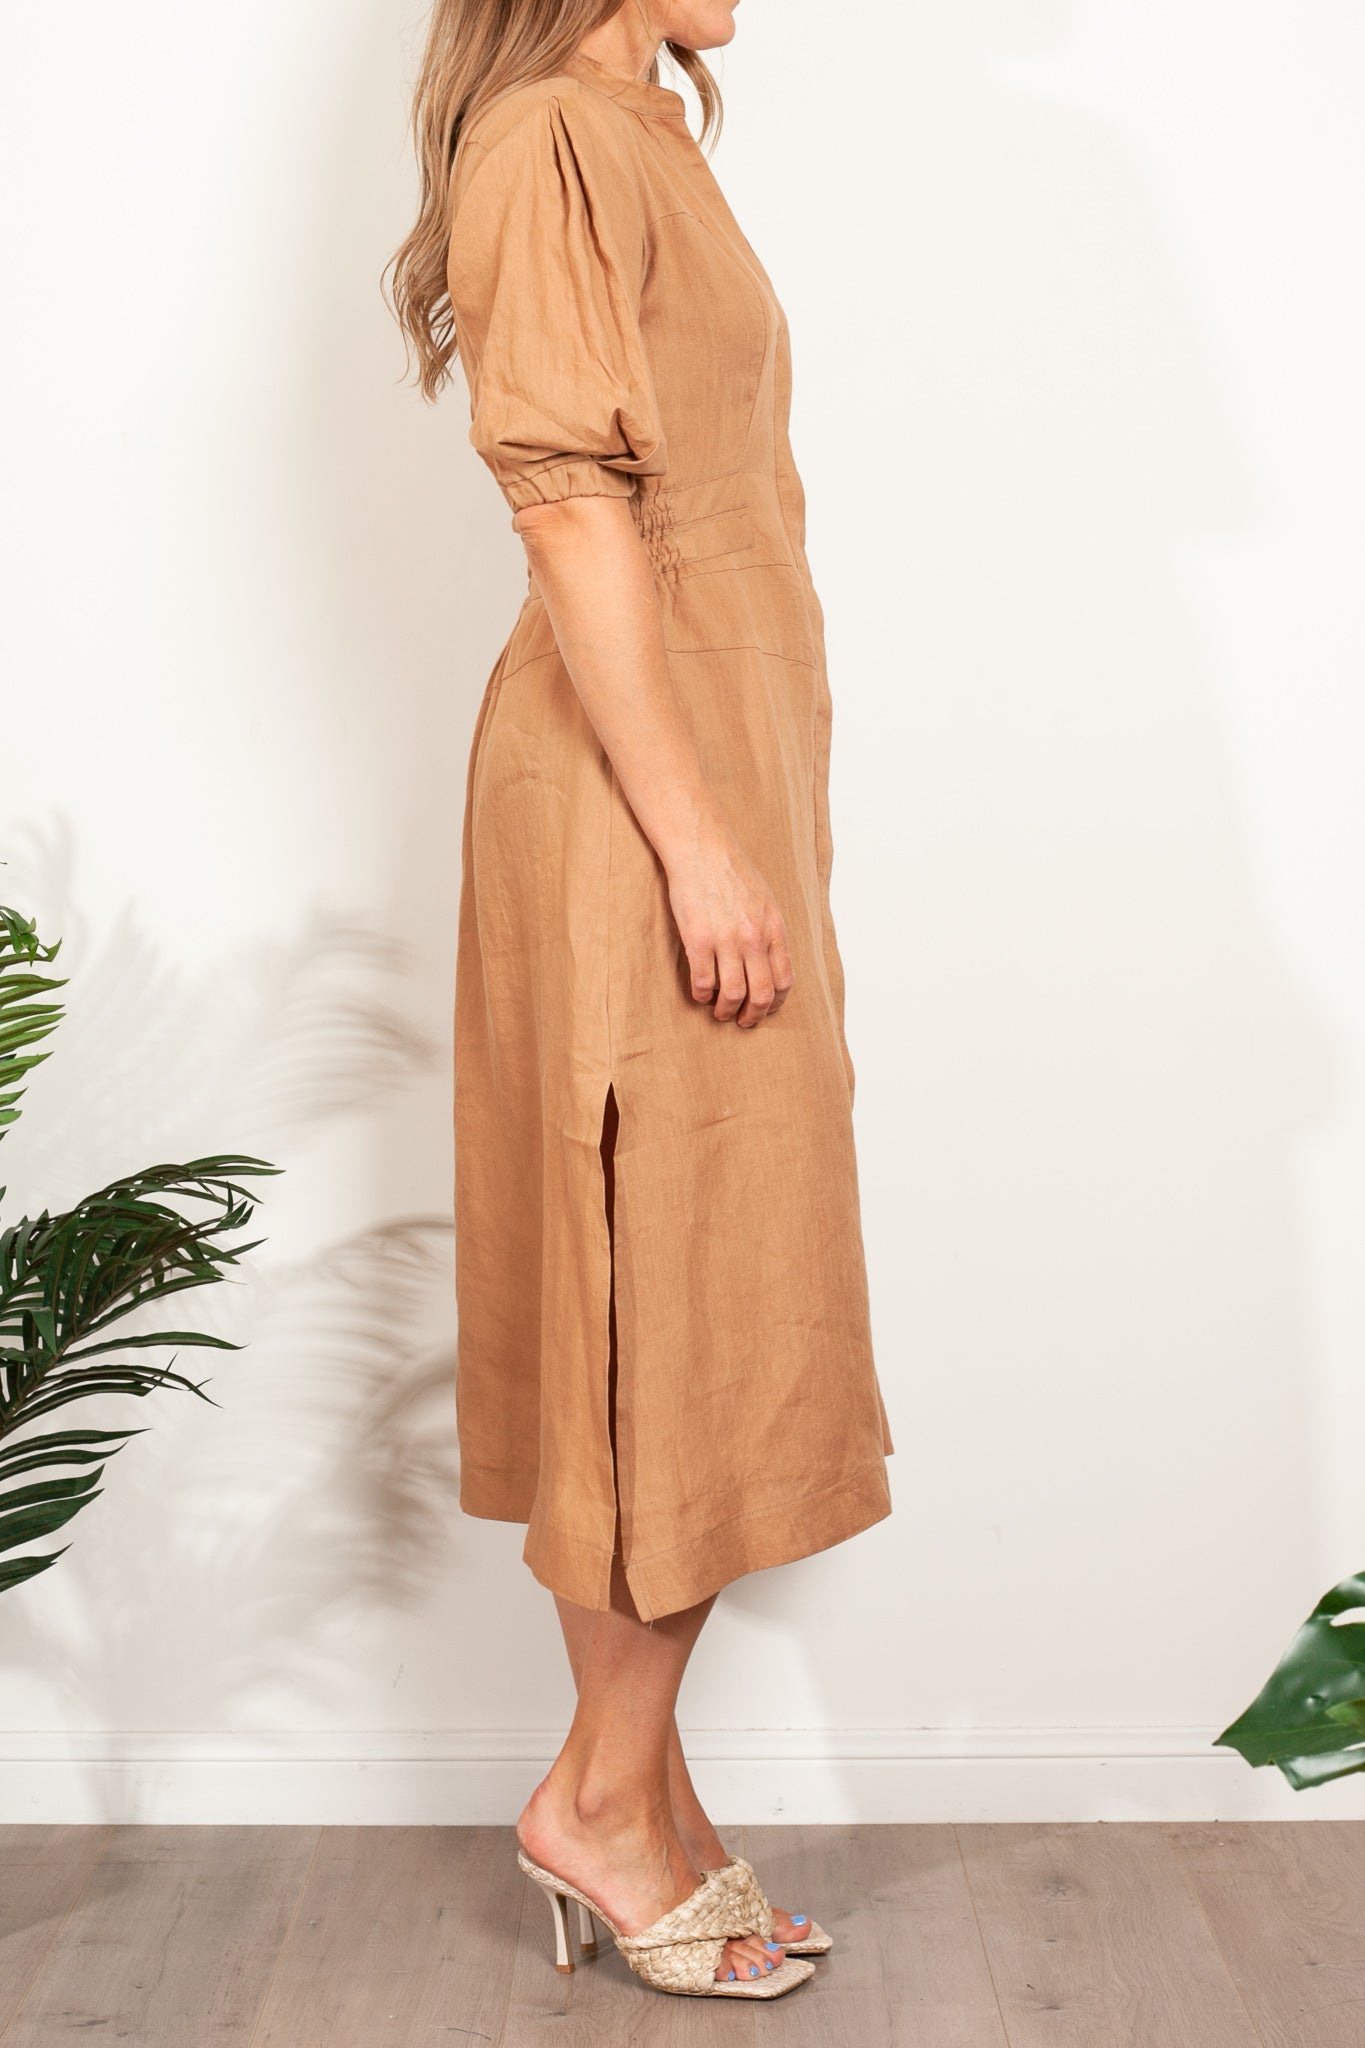 In the Sac Giselle Long Dress